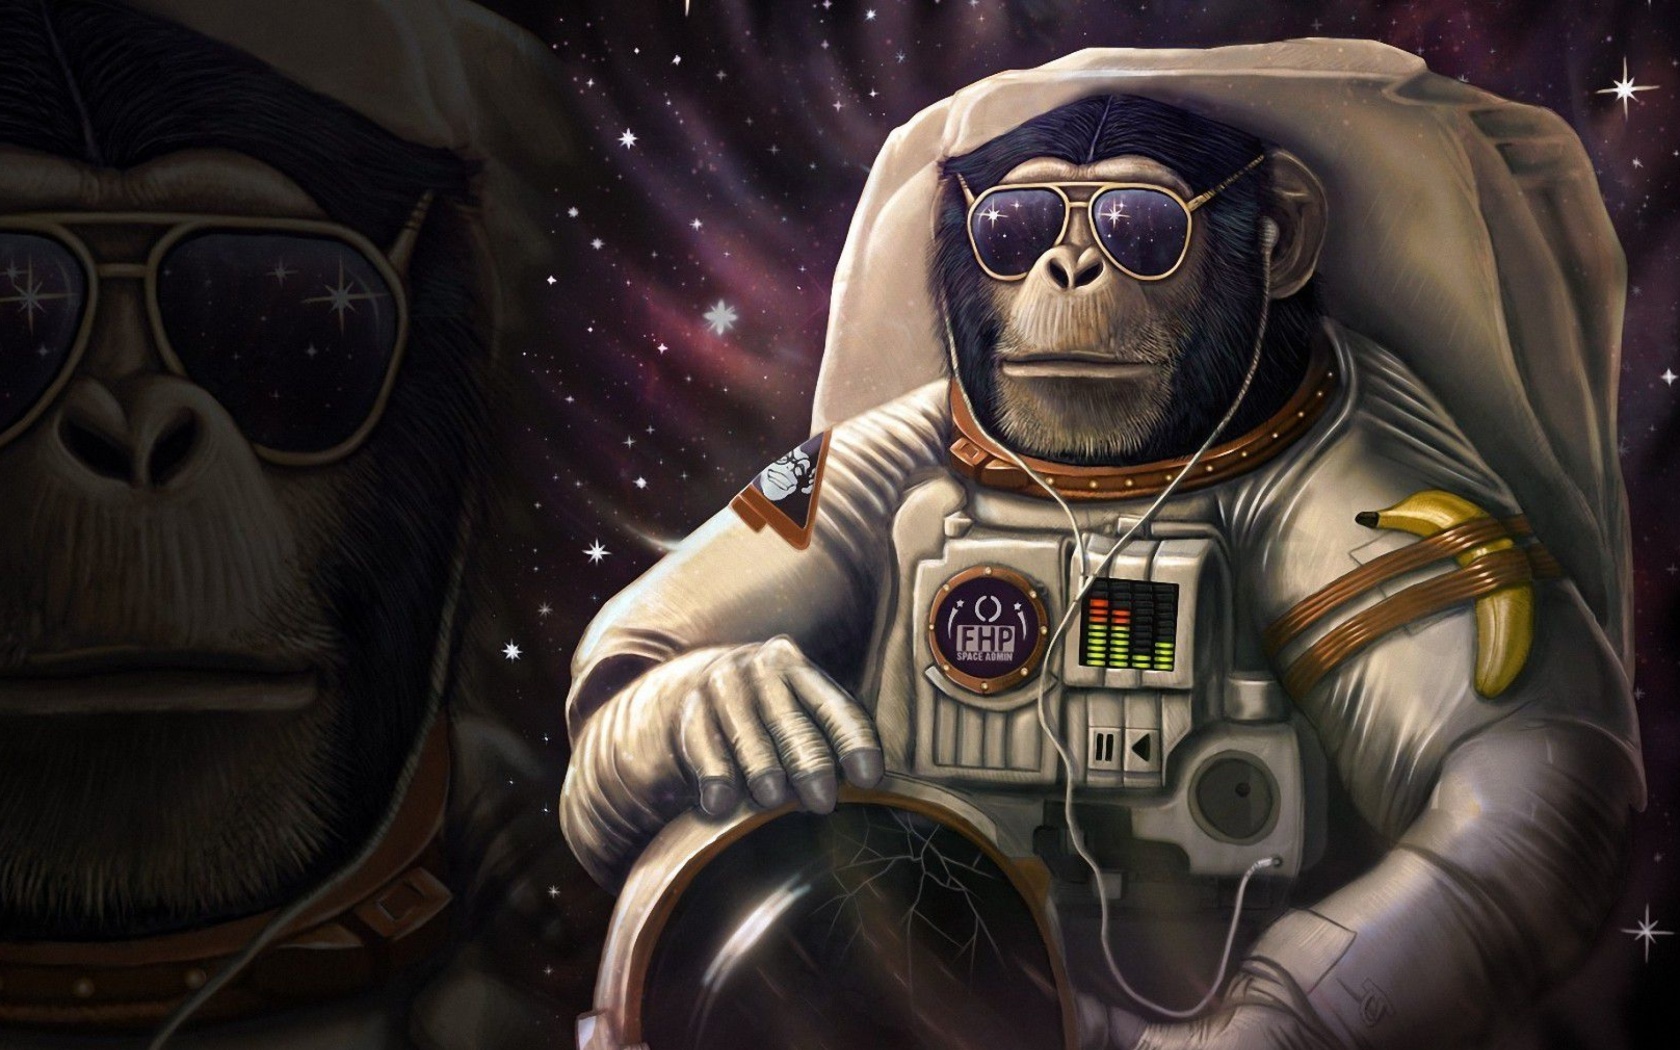 Monkeys and apes in space wallpaper 1680x1050